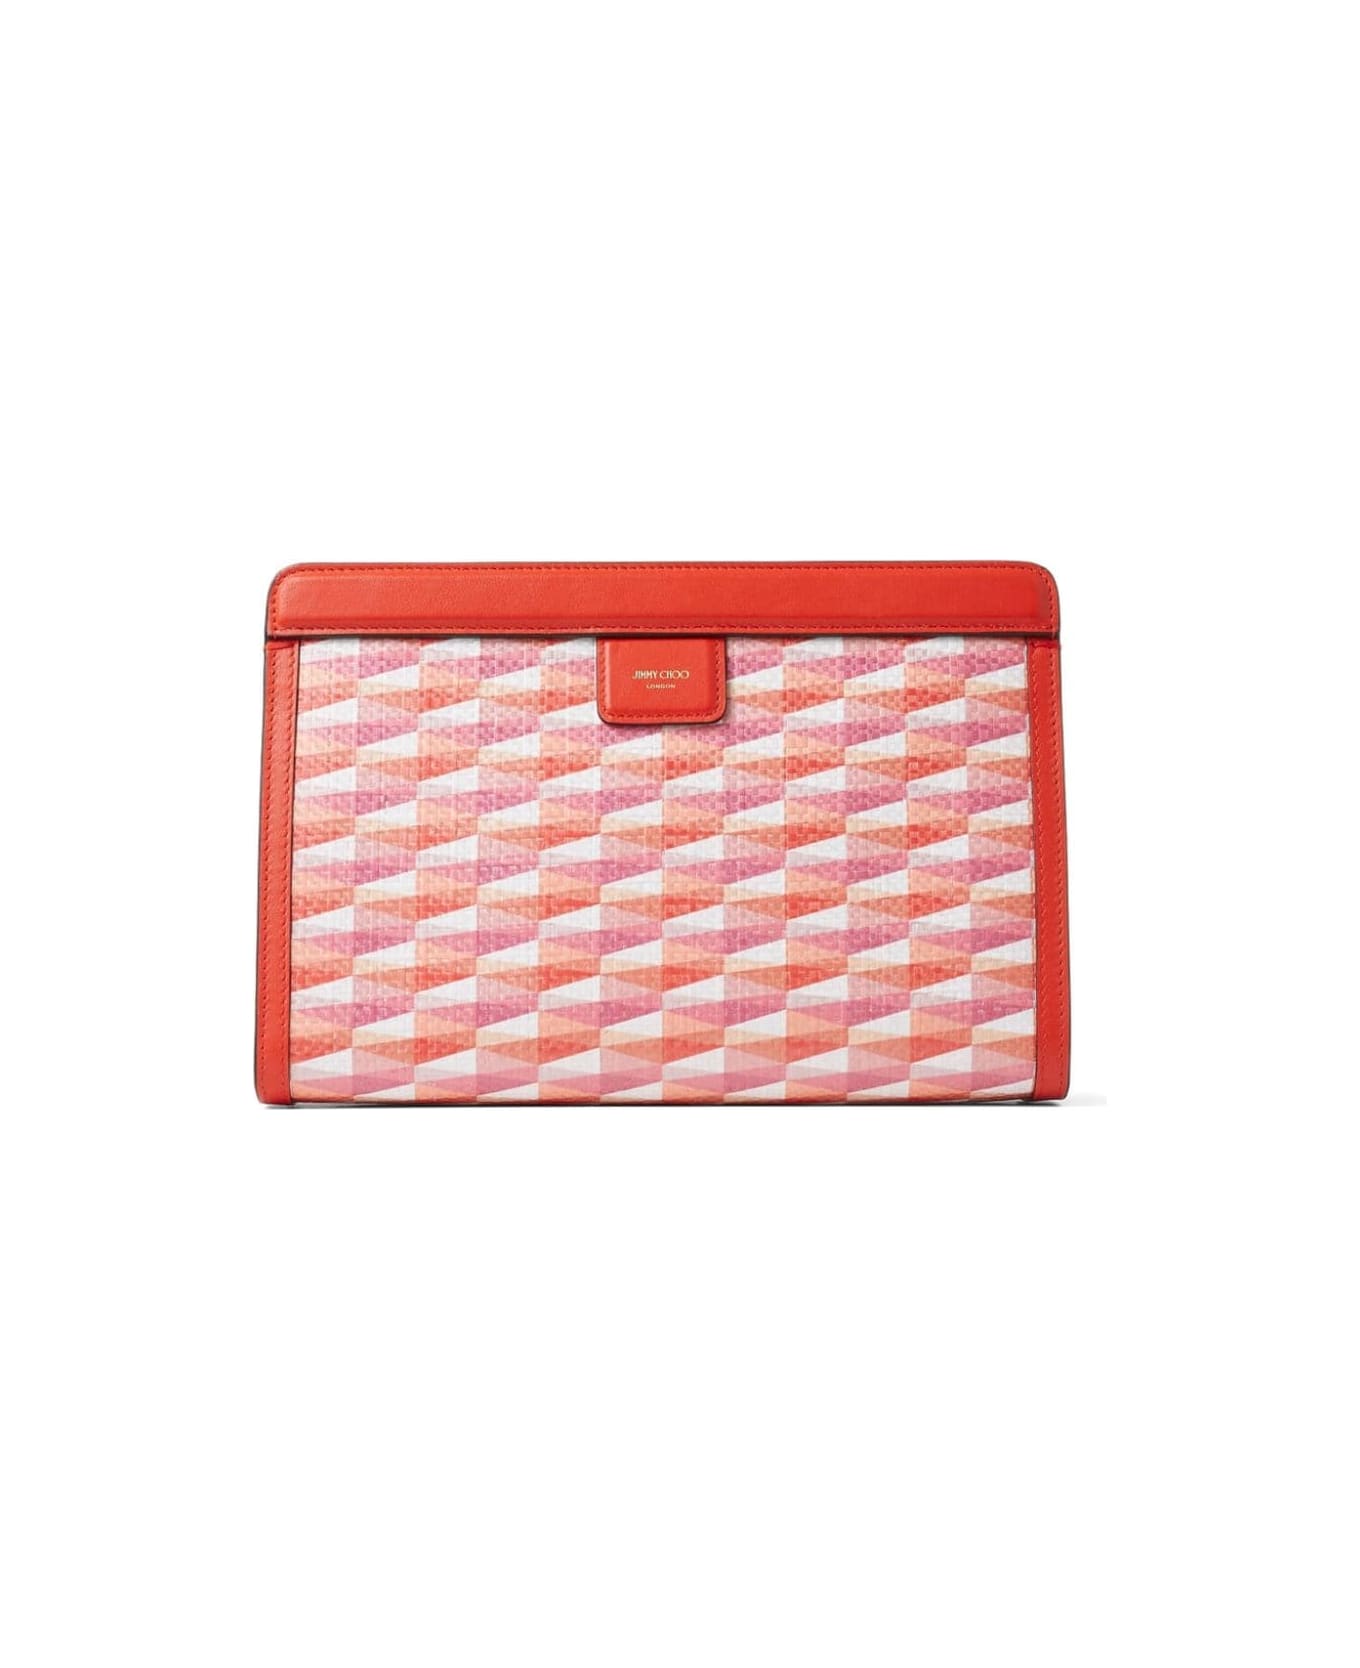 Jimmy Choo Avenue Pouch In Paprika/baby Pink Mix - Red